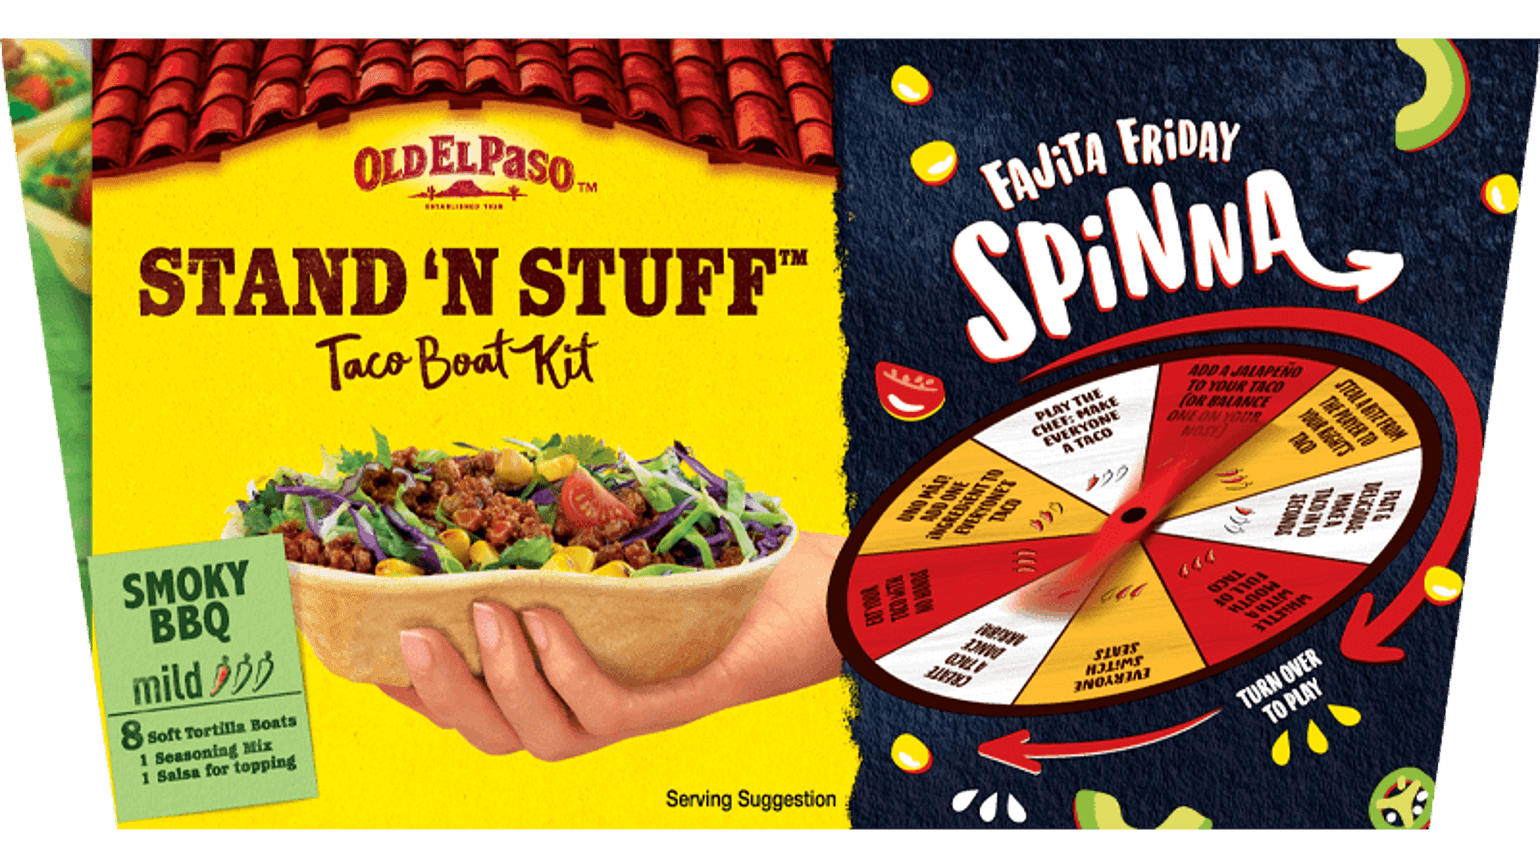 pack of Old El Paso's mild stand n stuff smoky bbq taco kit containing taco boats, seasoning mix & salsa